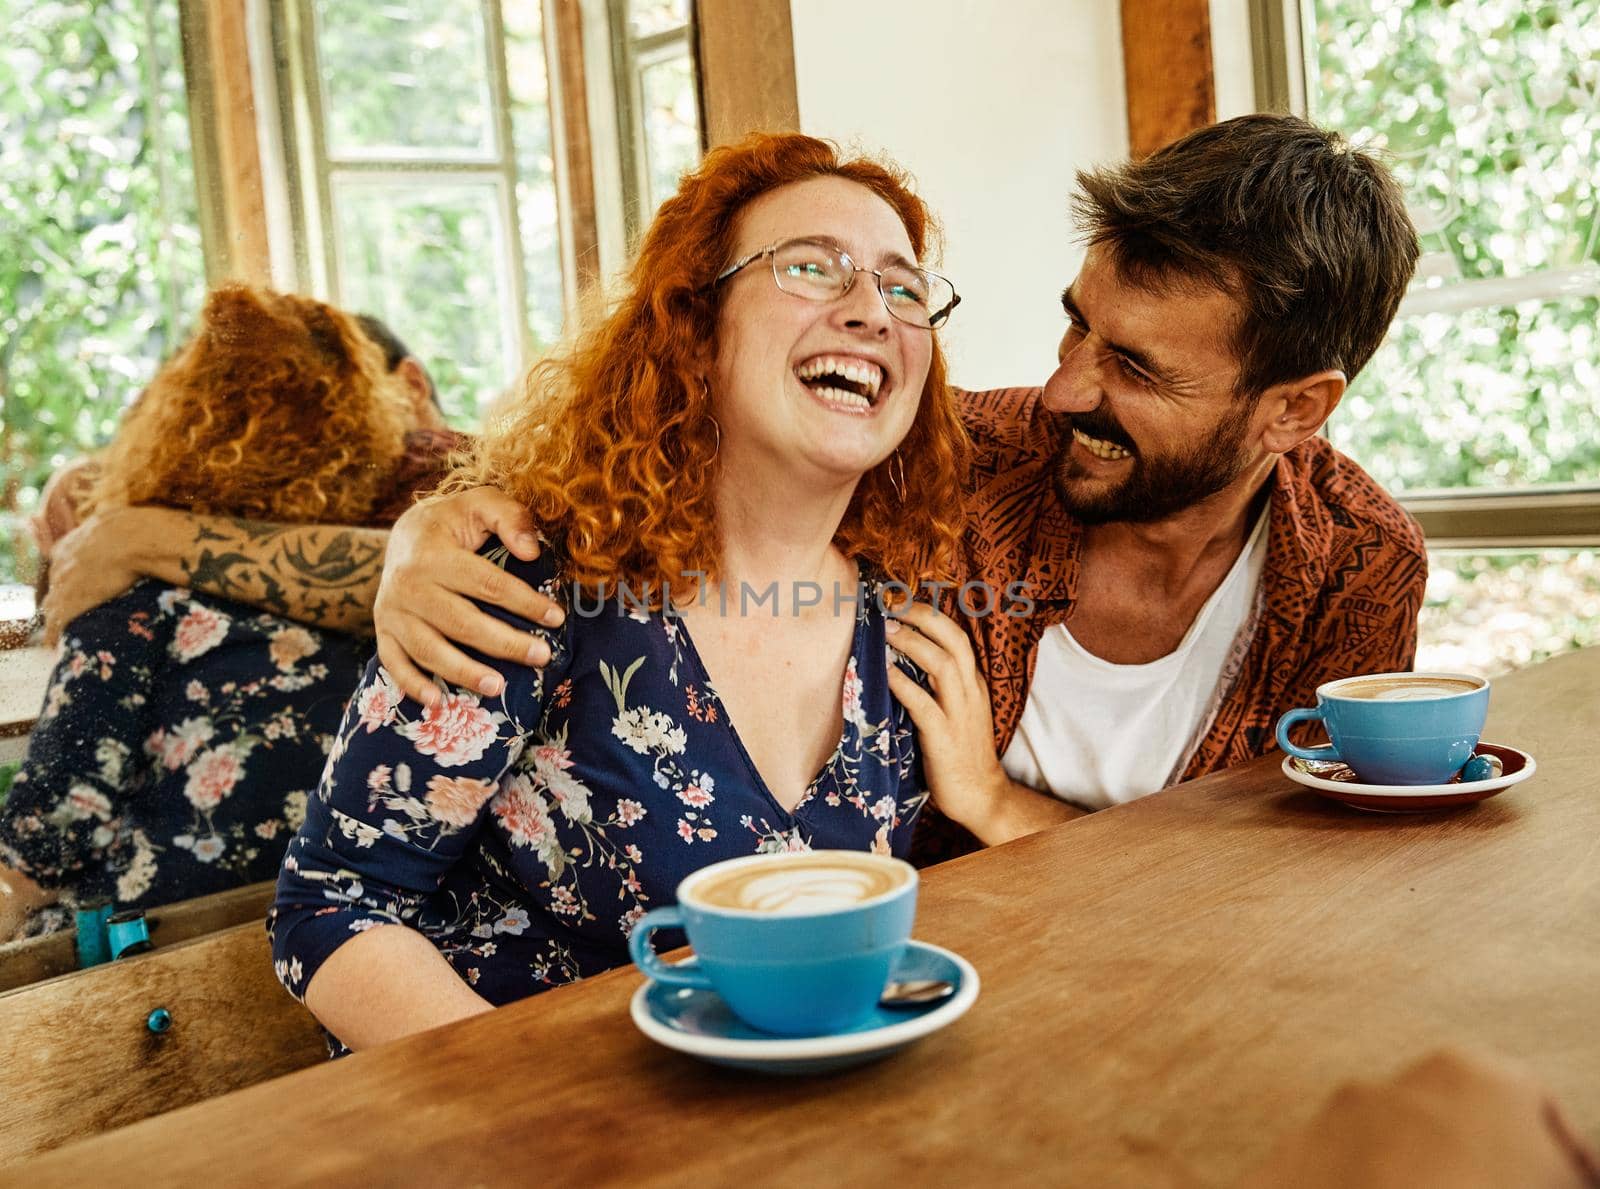 Happy young couple smiling and talking in a coffee shop cafe